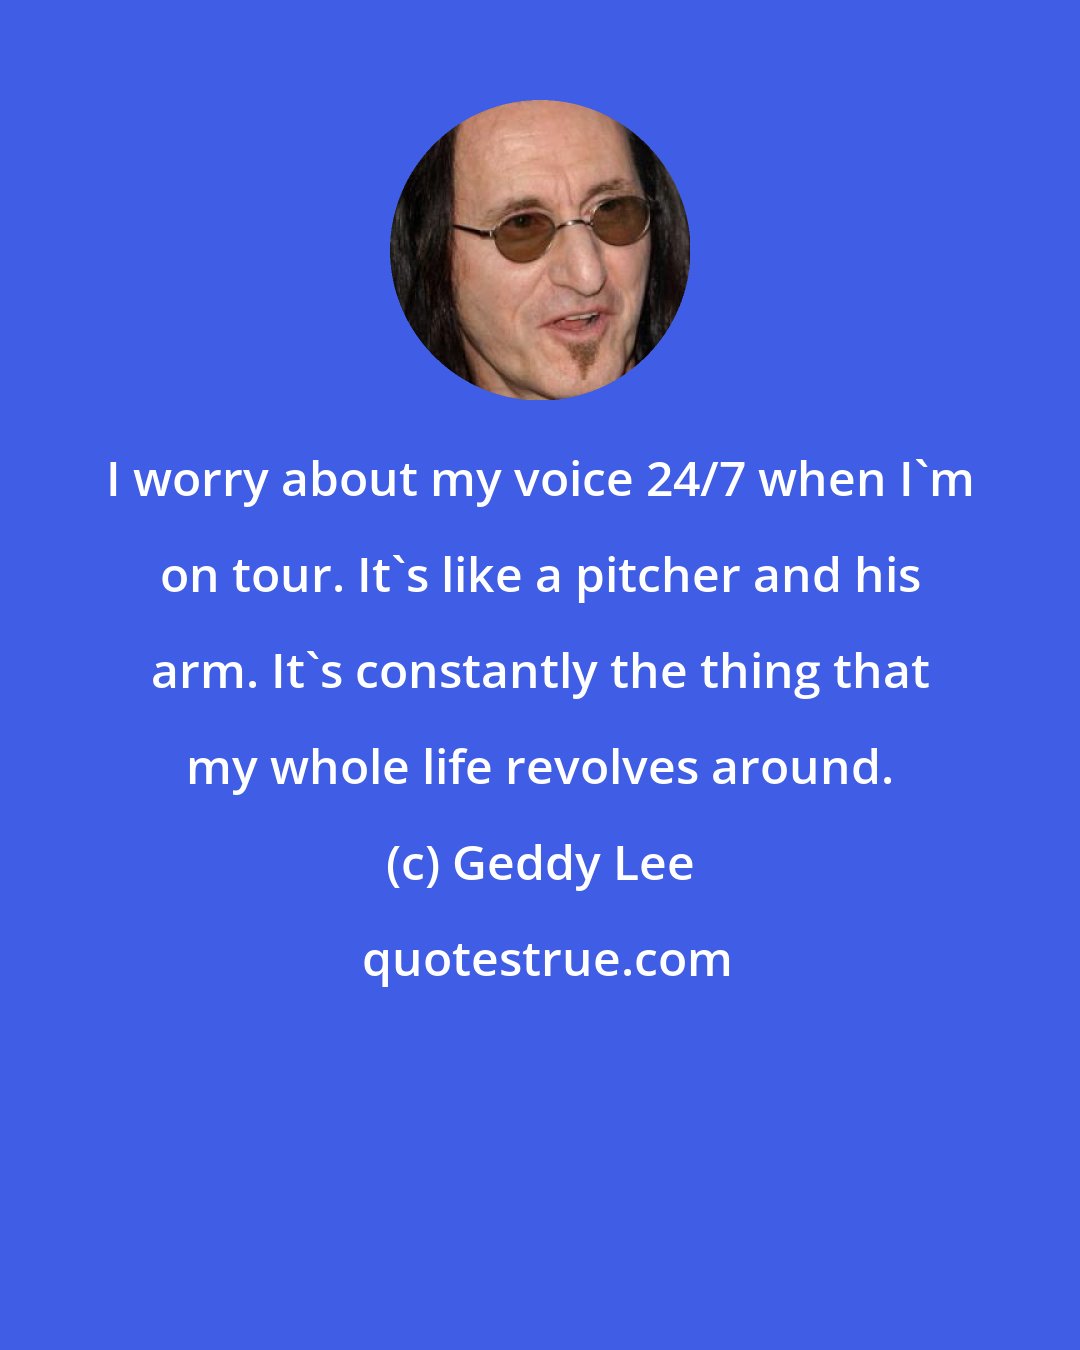 Geddy Lee: I worry about my voice 24/7 when I'm on tour. It's like a pitcher and his arm. It's constantly the thing that my whole life revolves around.